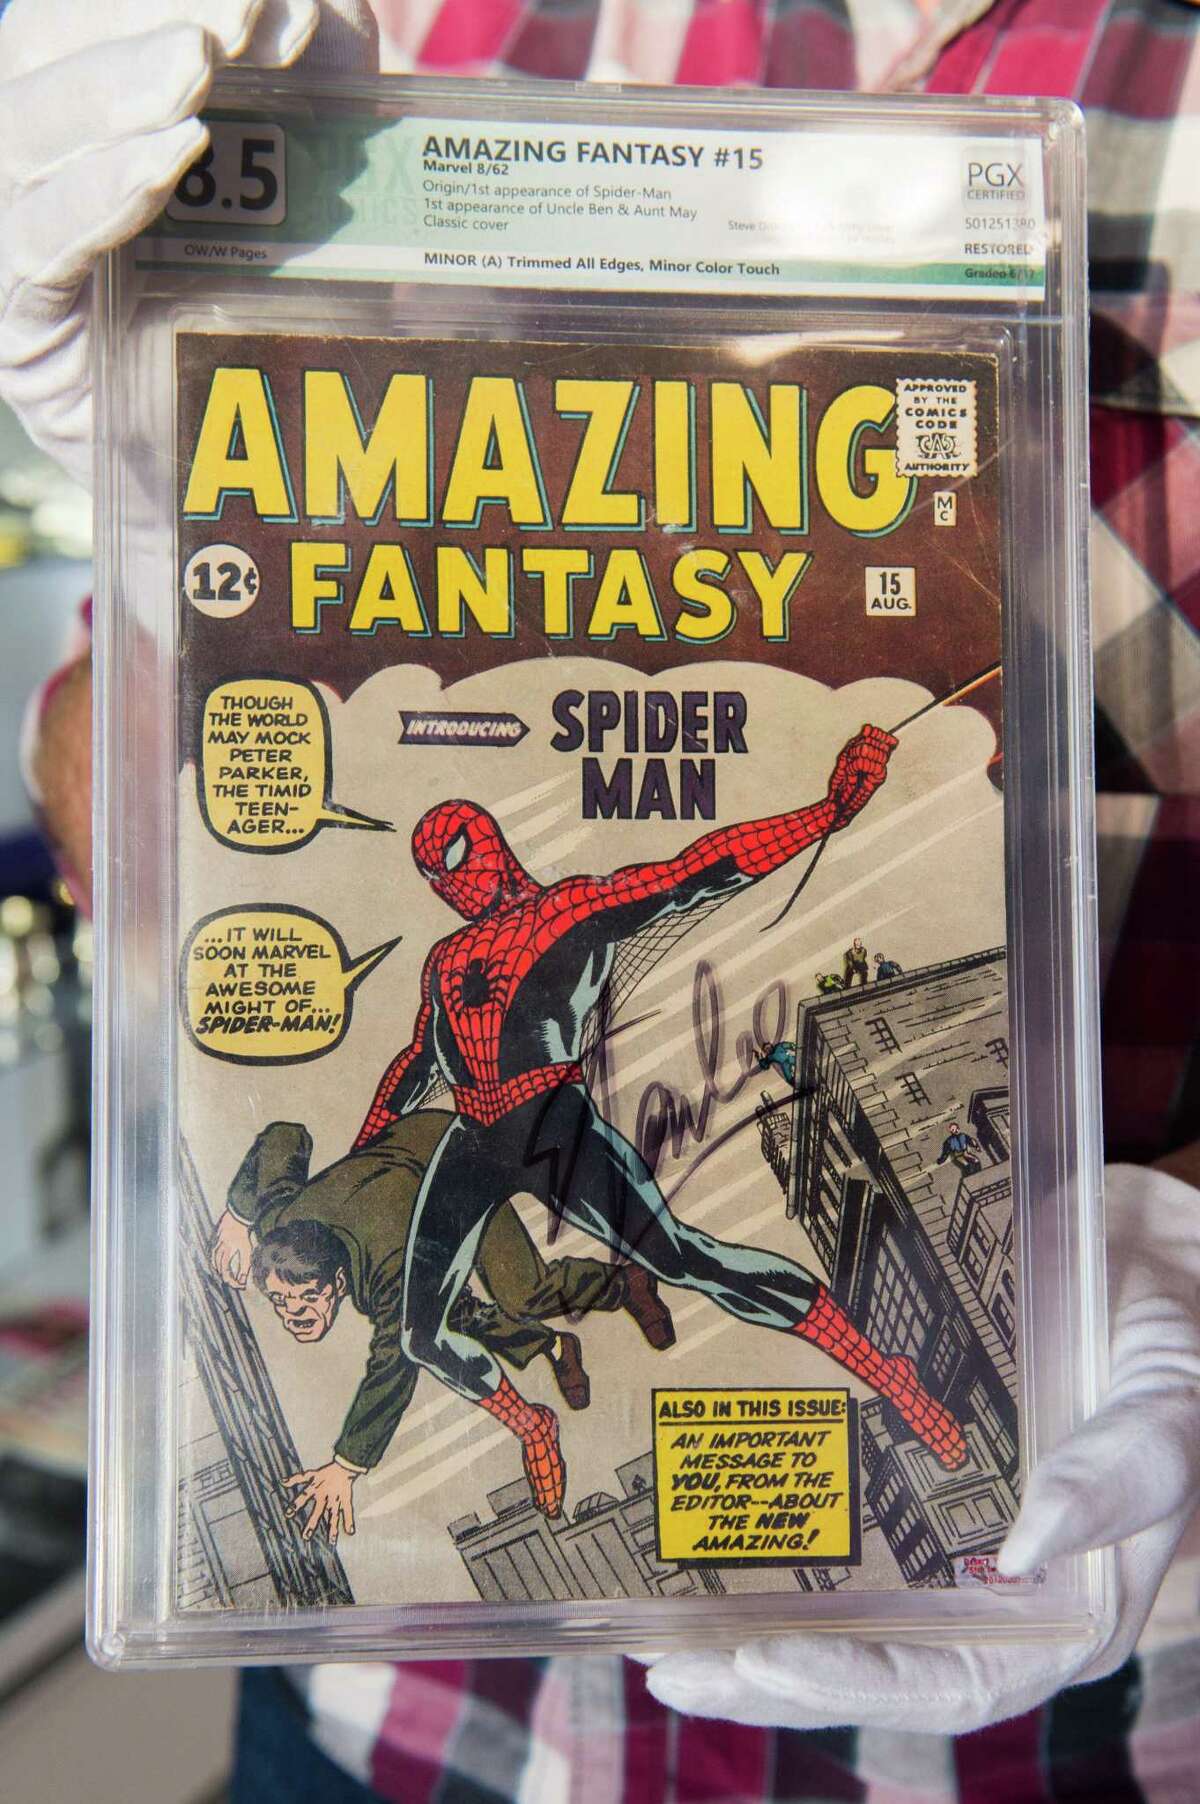 A Julien's Auctions appraisal consultant displays the "Amazing Fantasy #15" comic book autographed by Stan Lee at Julien's Auction House in Beverly Hills, California, on November 13, 2018. "Amazing Fantasy #15" features the very first appearance of Marvel's Spider-Man.